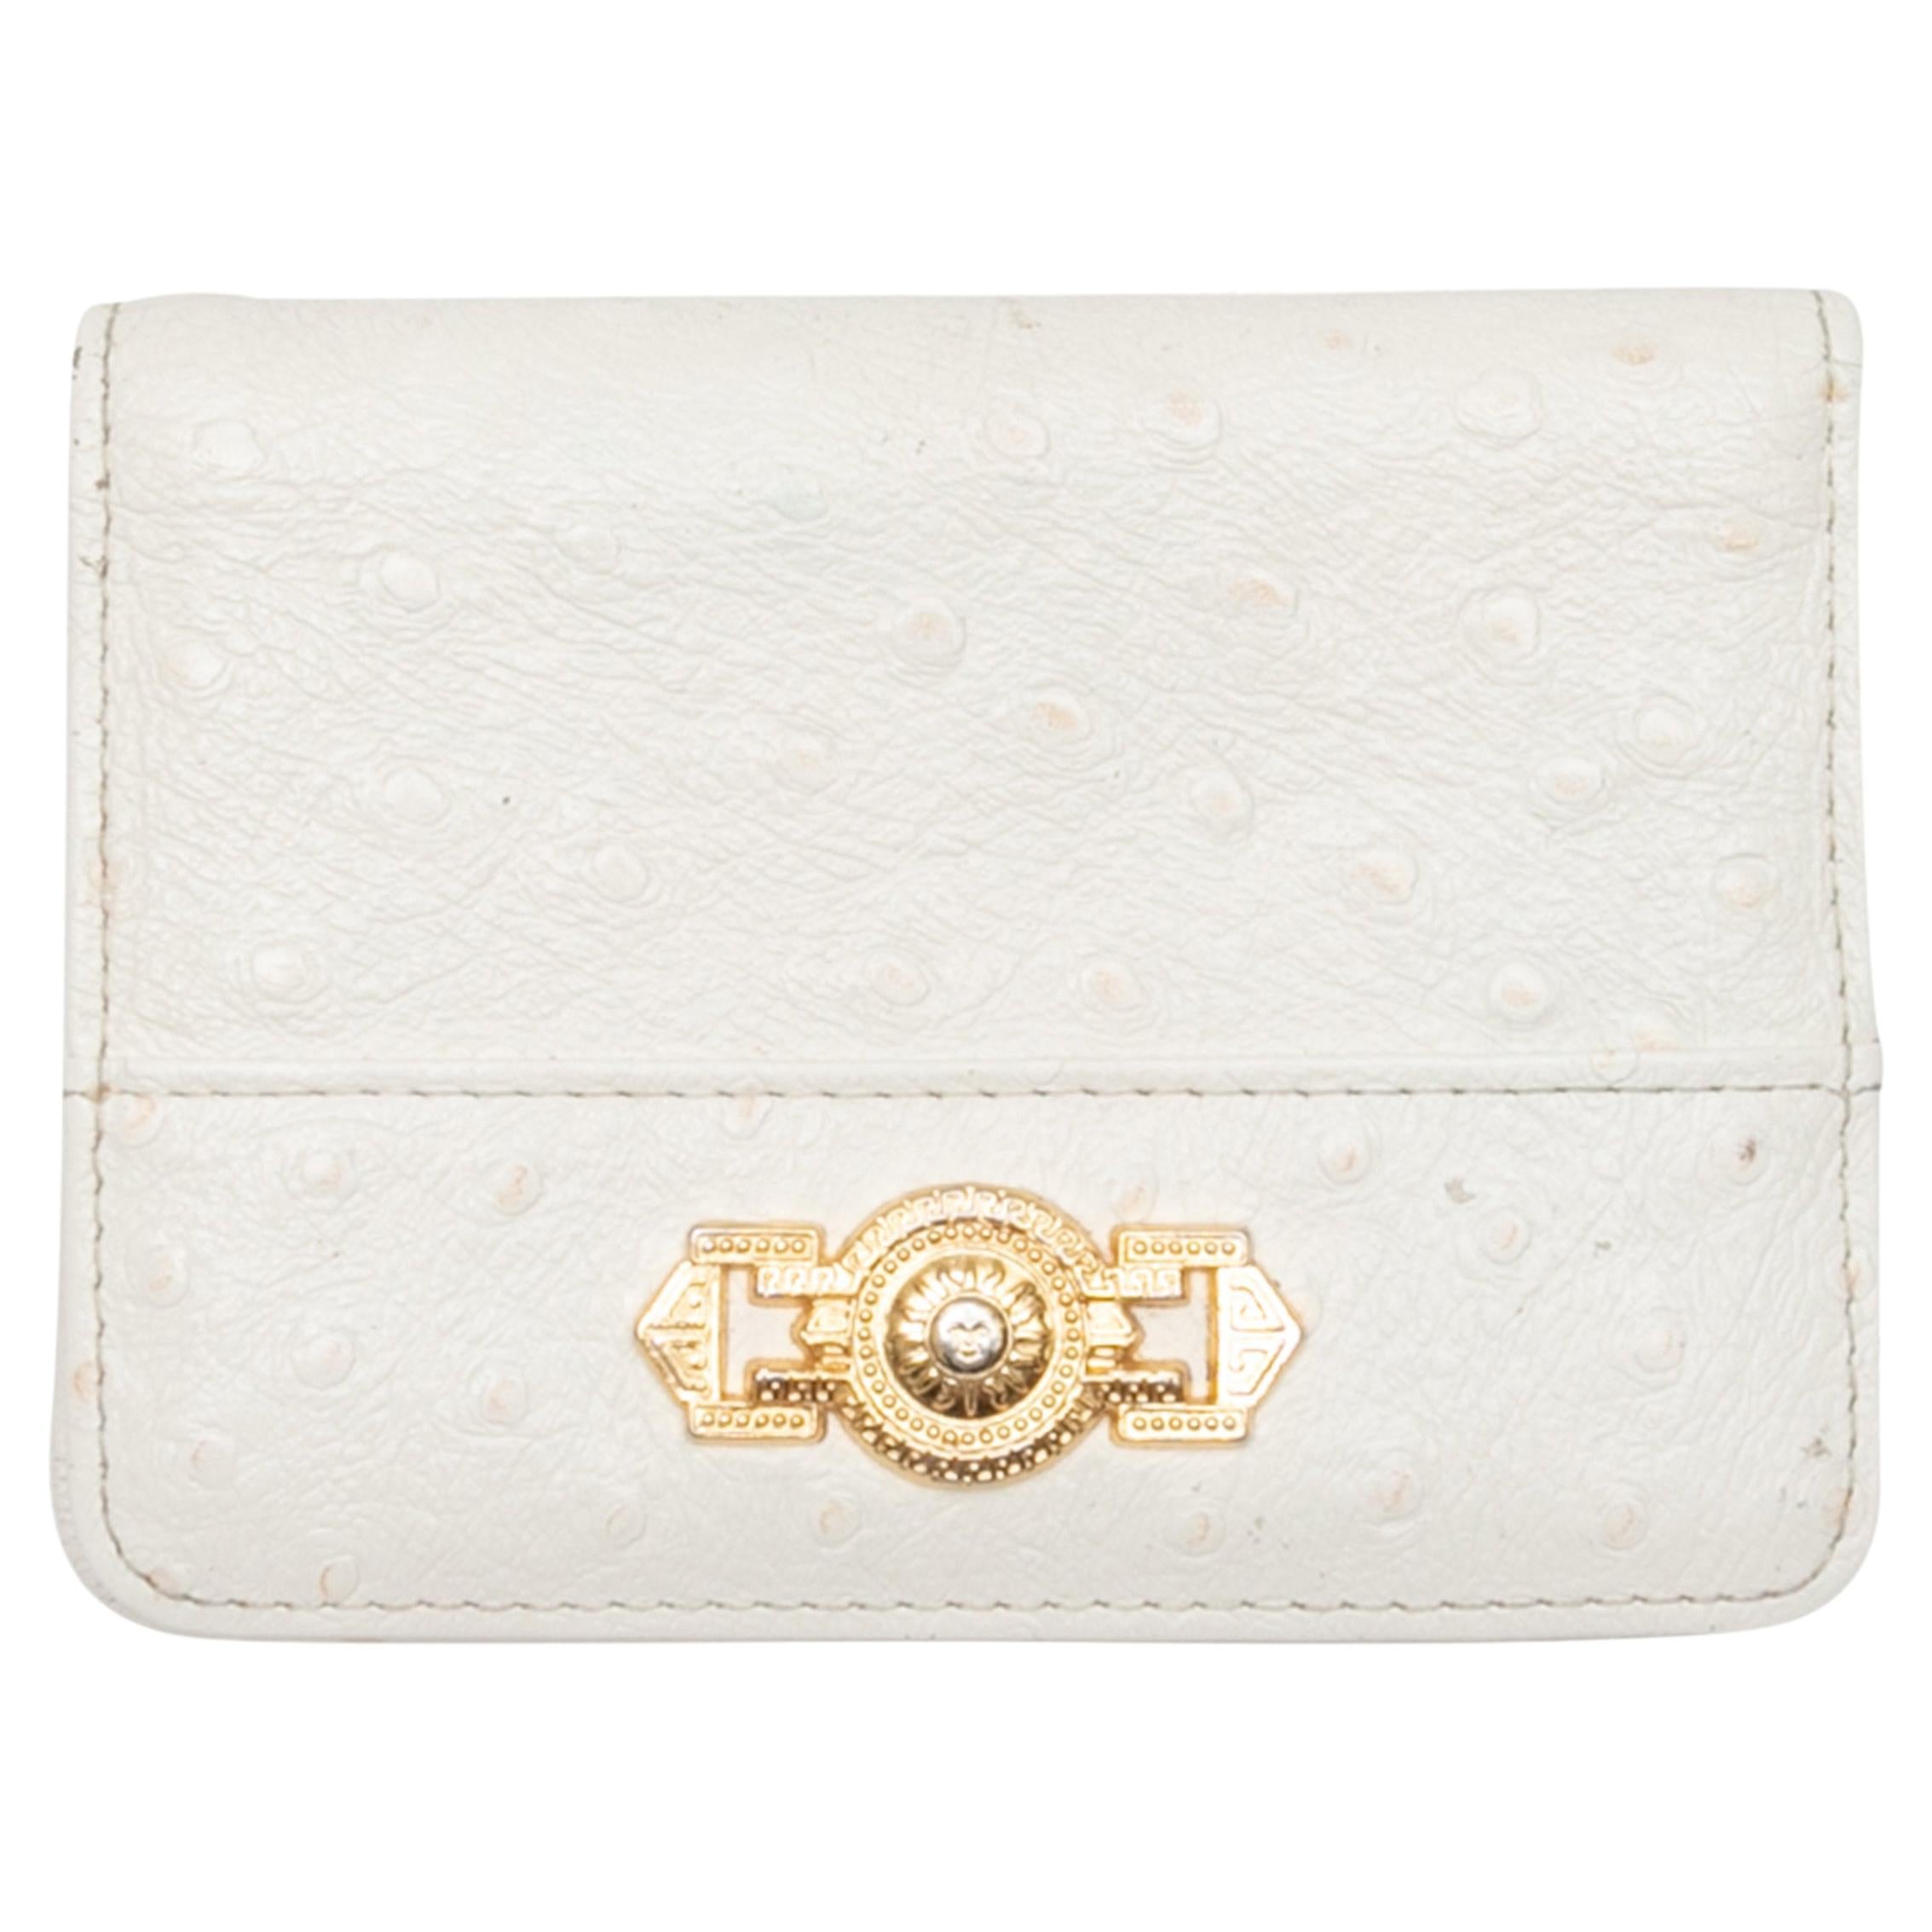 Vintage White Gianni Versace Ostrich Leather Wallet For Sale